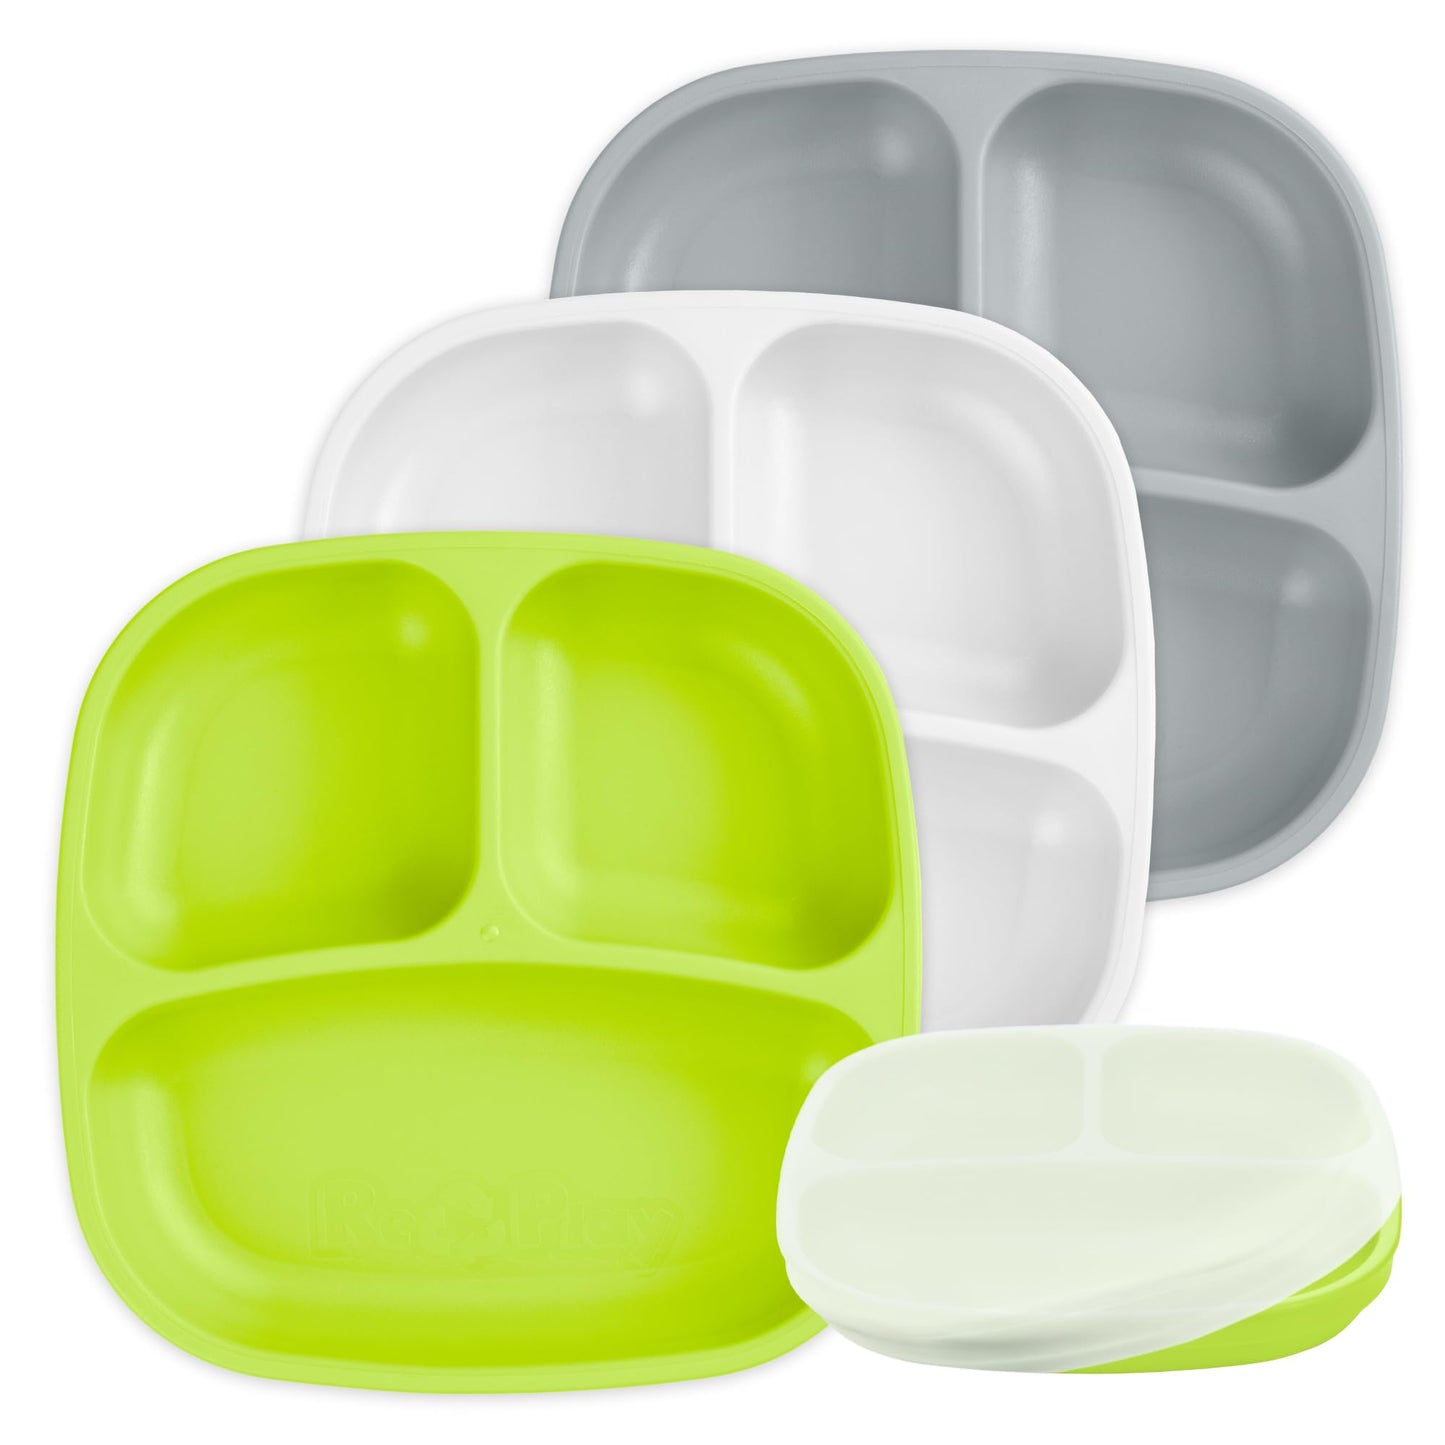 Re-Play Made in USA 7" Deep Walled Divided Plates for Kids, Set of 3 Without Lid - Reusable 3 Compartment Plates, Dishwasher and Microwave Safe - 7.37" x 7.37" x 1.25", Modern Aqua